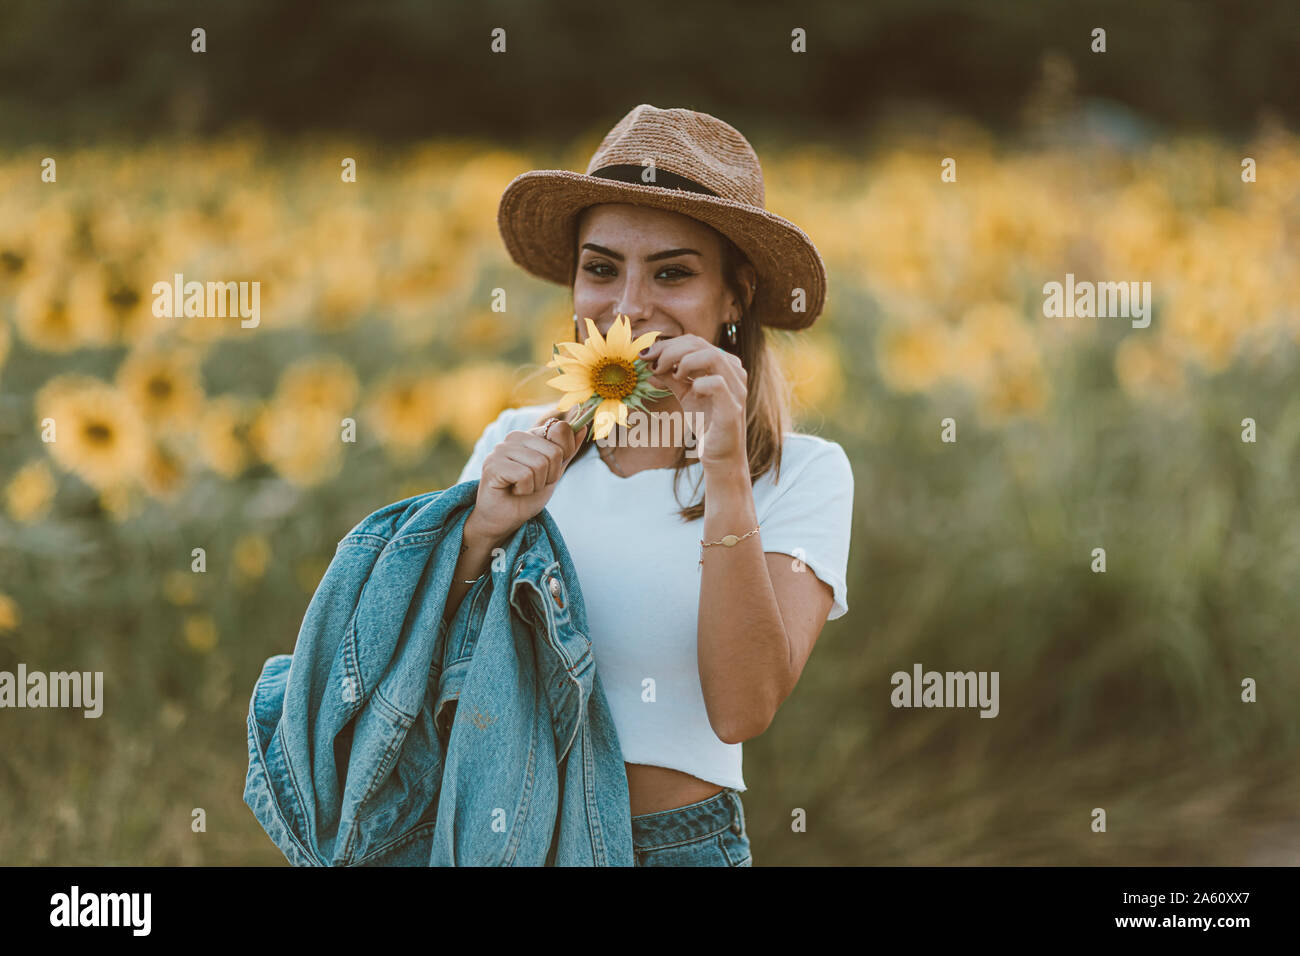 Portrait of young woman with blue denim jacket and hat in a field of sunflowers Stock Photo